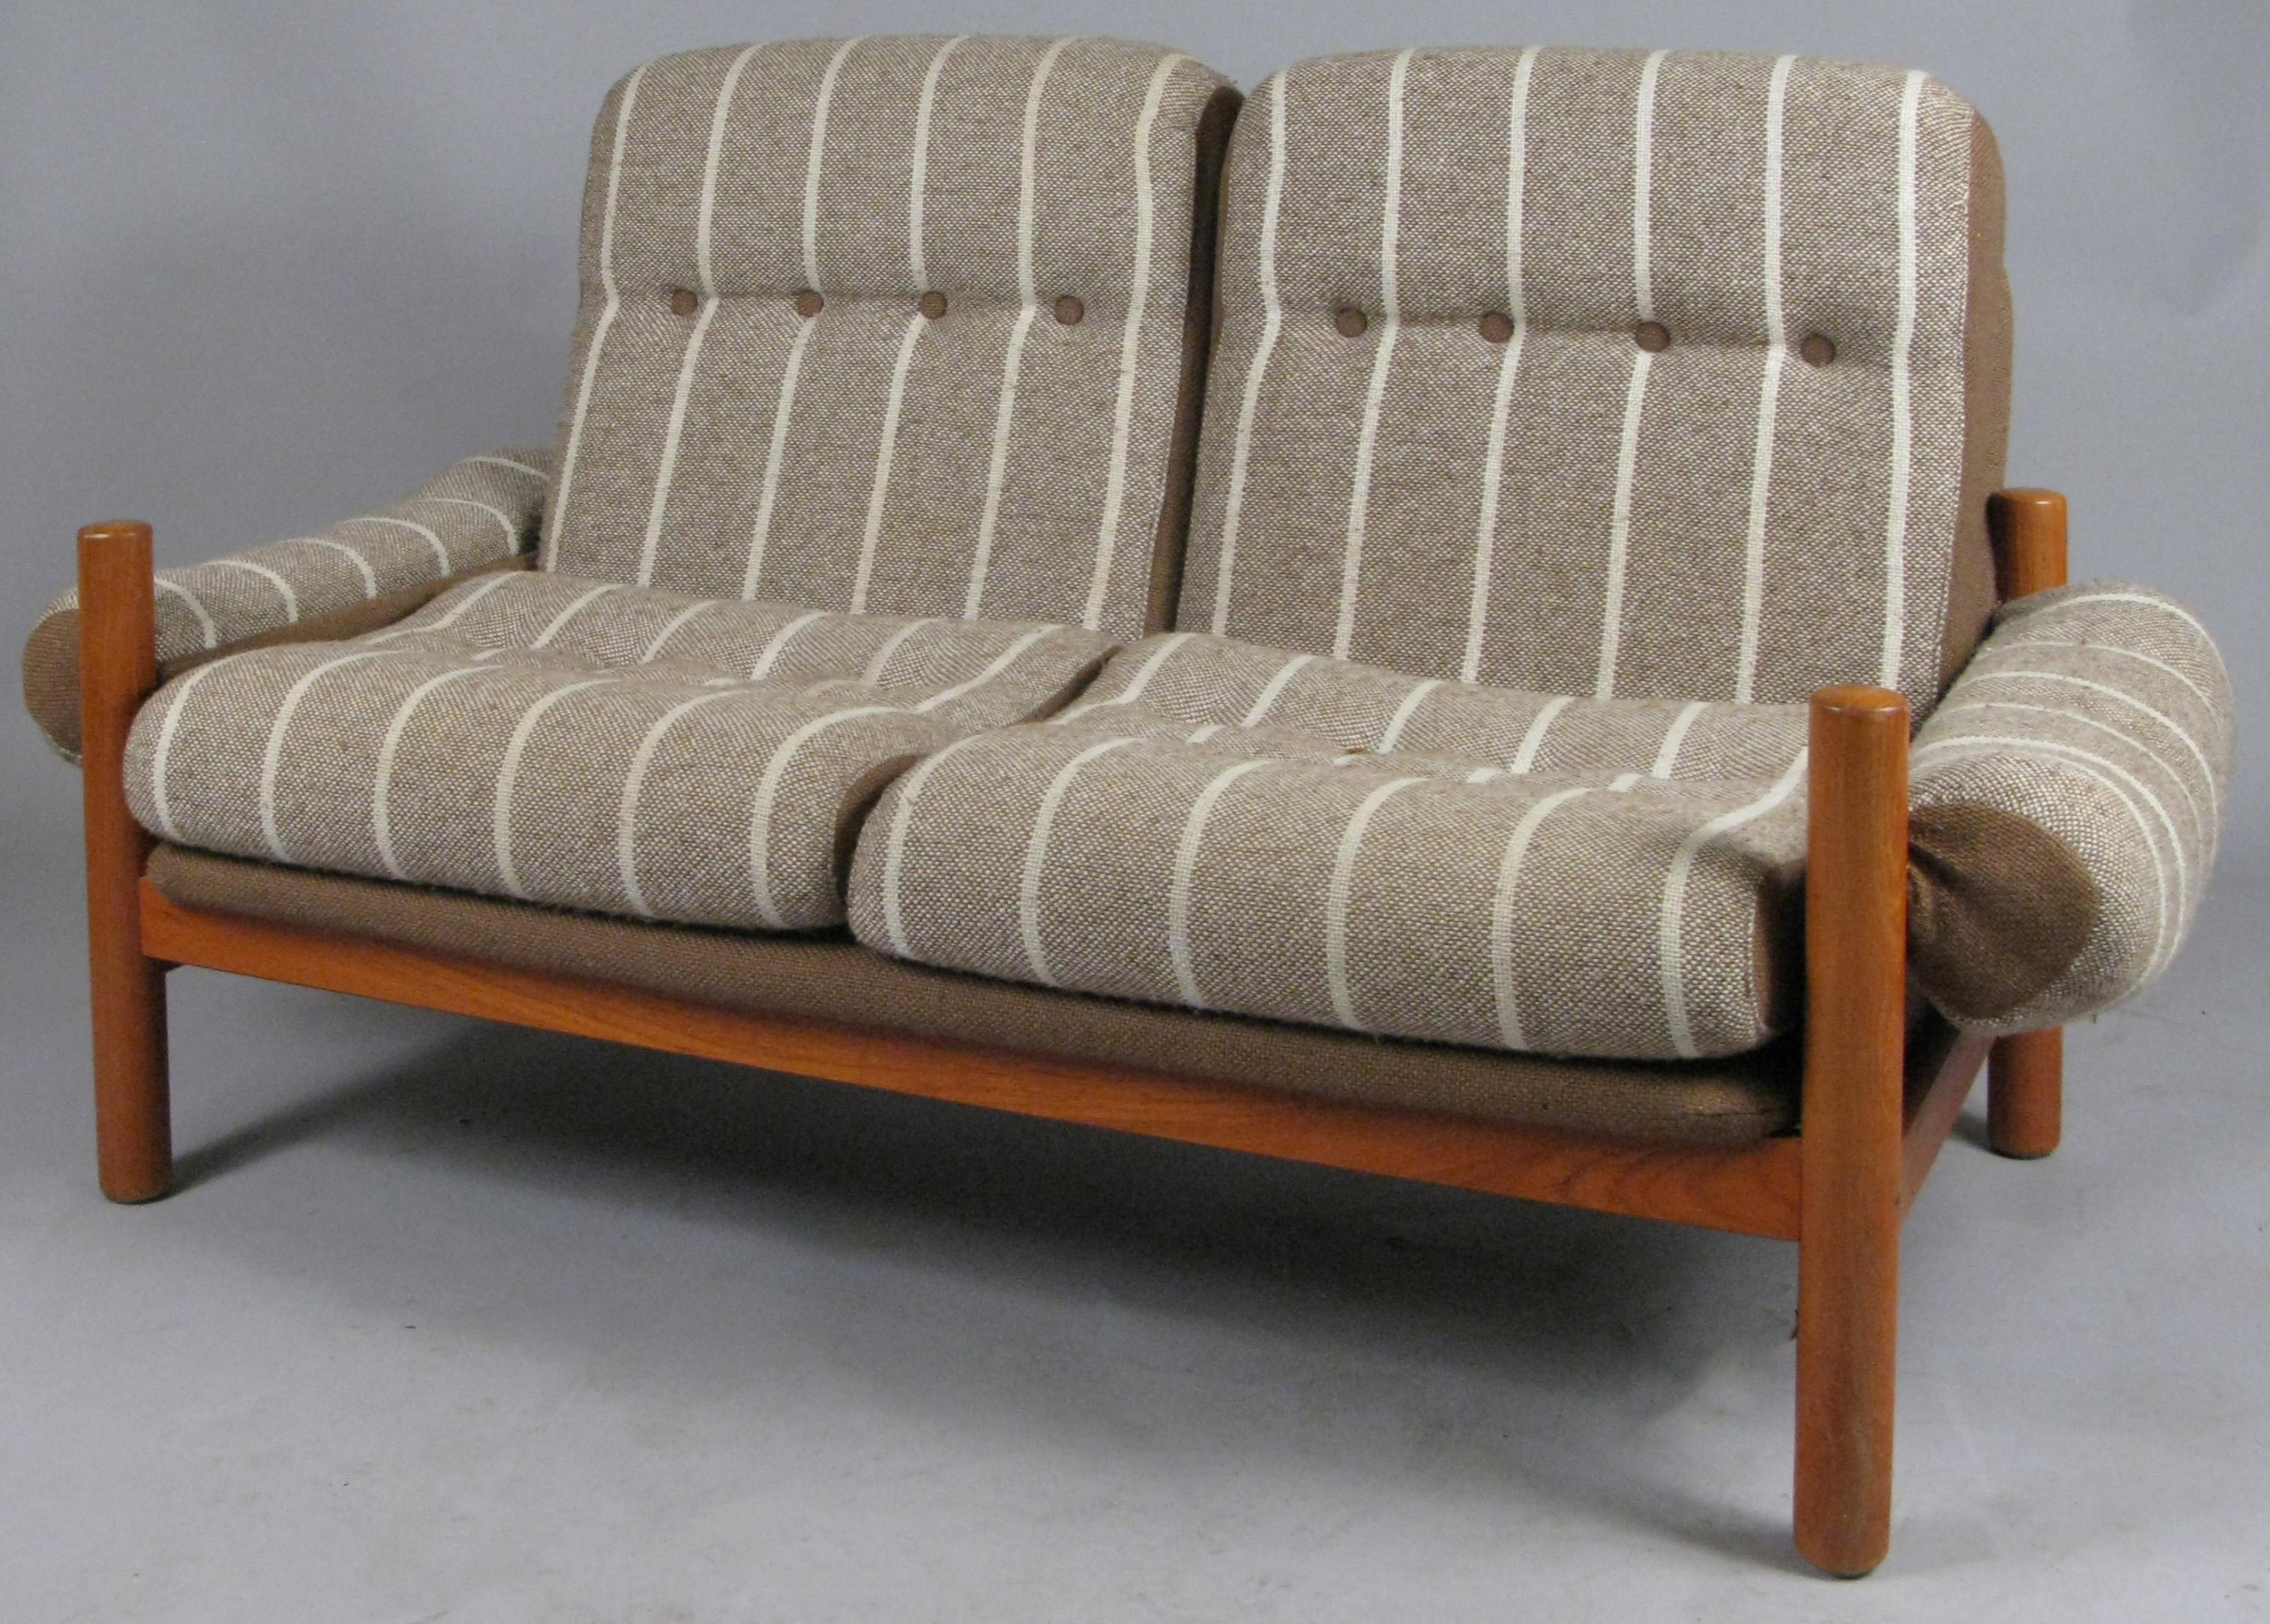 A very handsome solid teak vintage 1970s two-seat settee made by Domino Mobler. With it's original brown linen covered seat frames, and newly upholstered seat, back, and arm cushions in a woven beige and cream. Very stylish and comfortable.